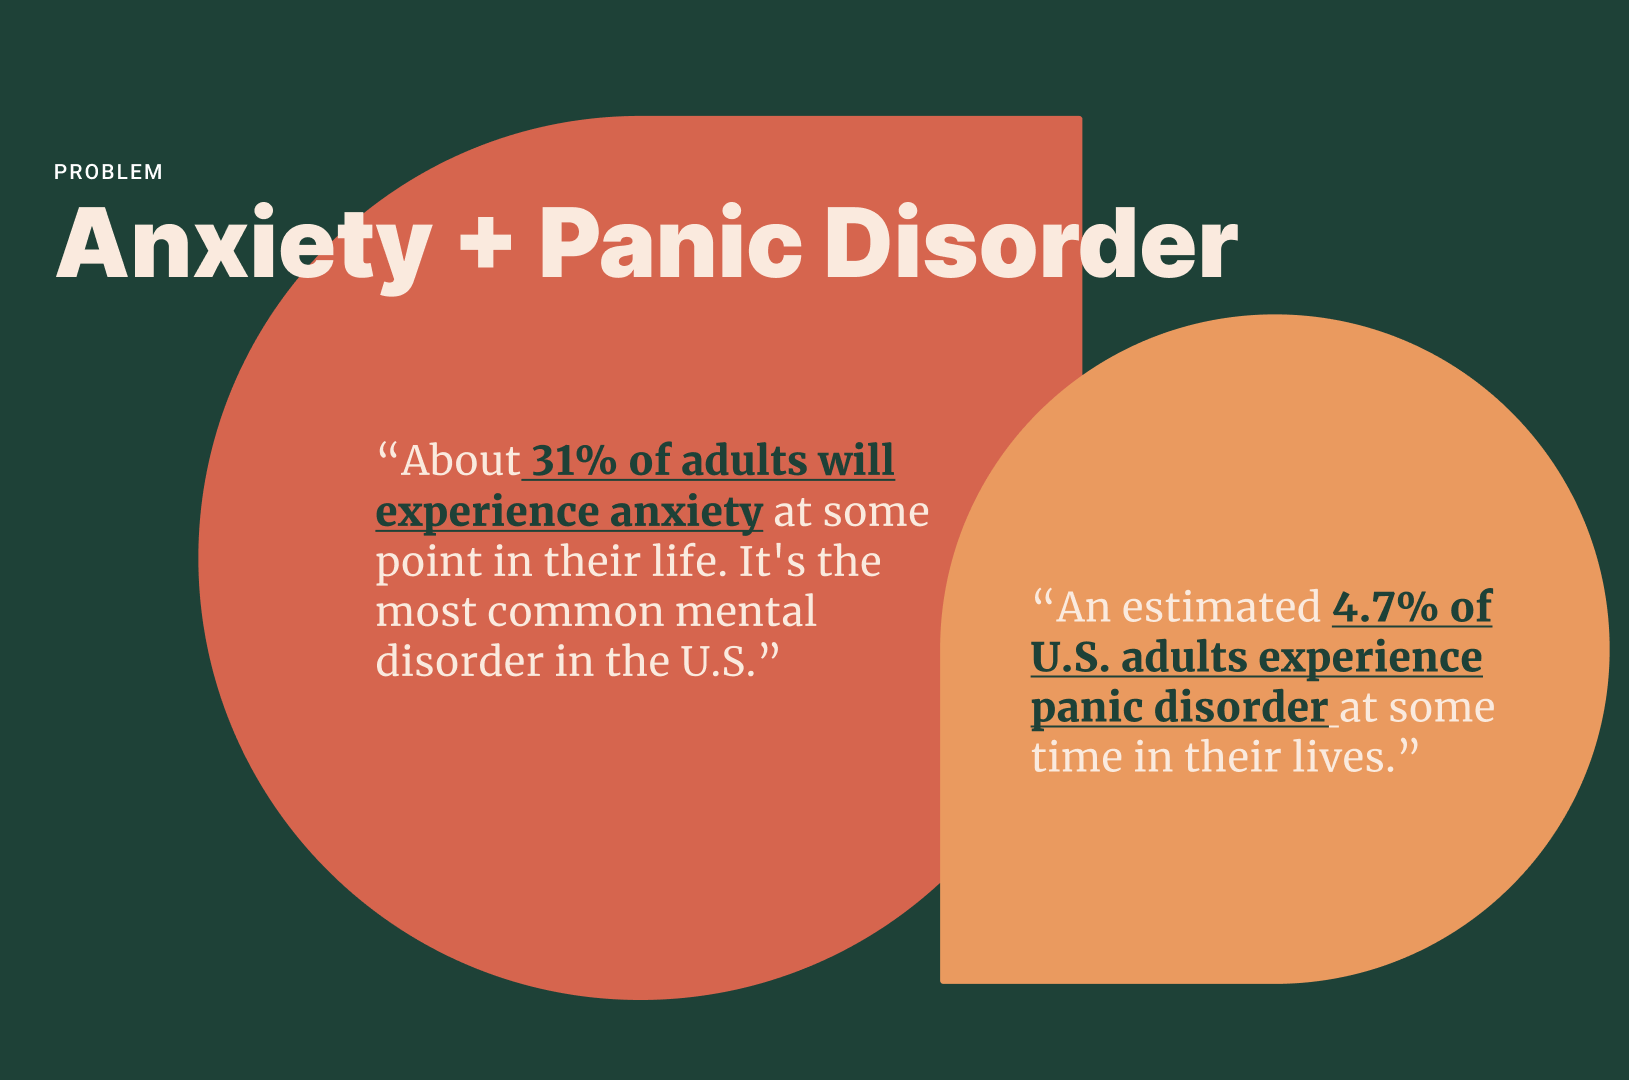 Anxiety and Panic Disorder presentation slide